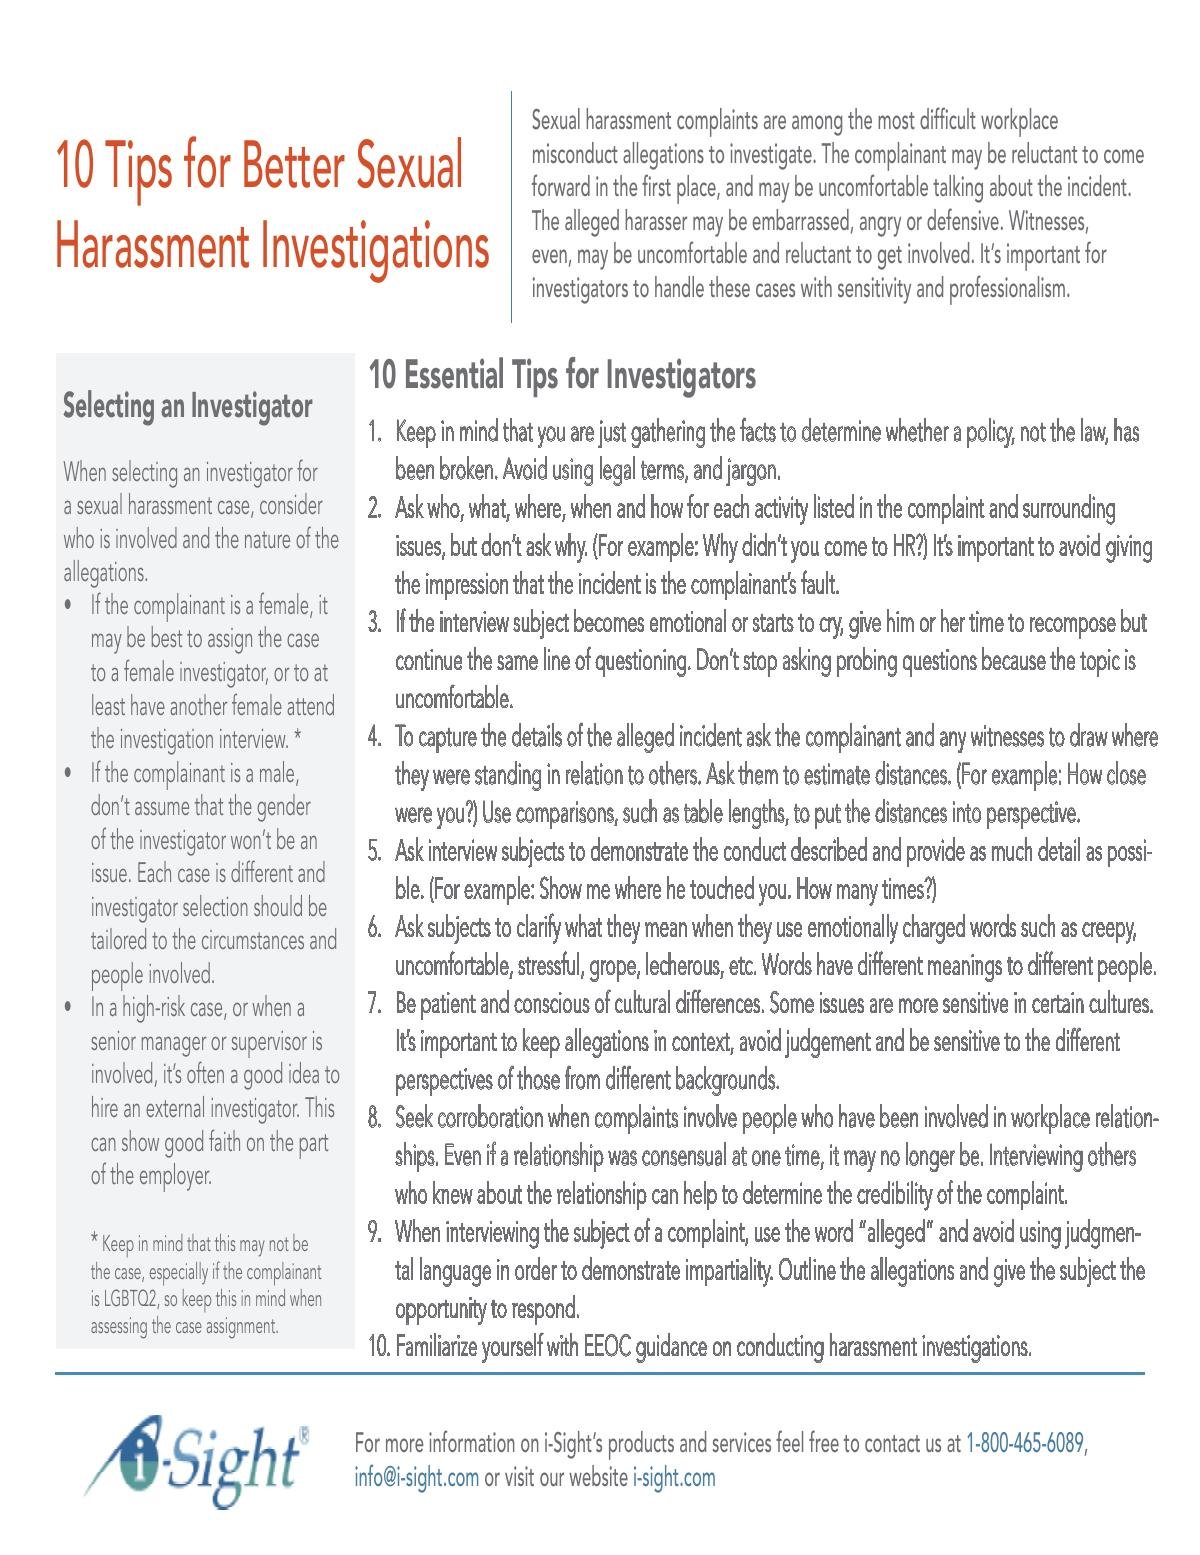 10 Tips for Better Sexual Harassment Investigations: A cheat sheet by i-Sight Software